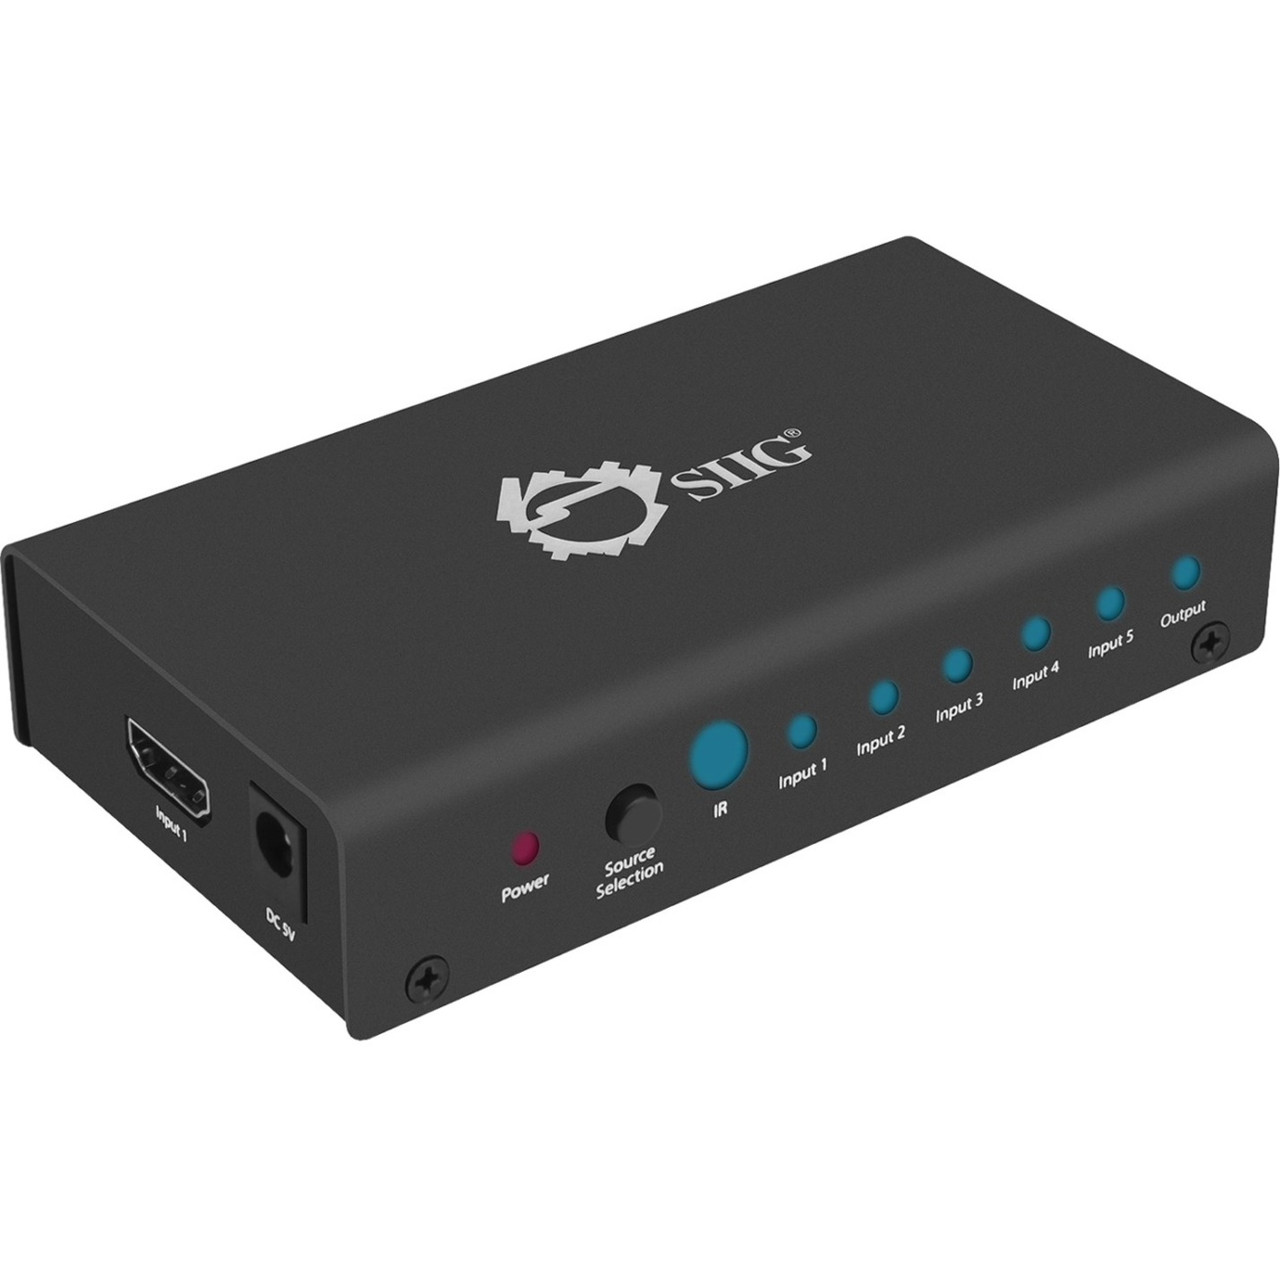 SIIG 5x1 HDMI Switch 4K - CE-H23012-S1